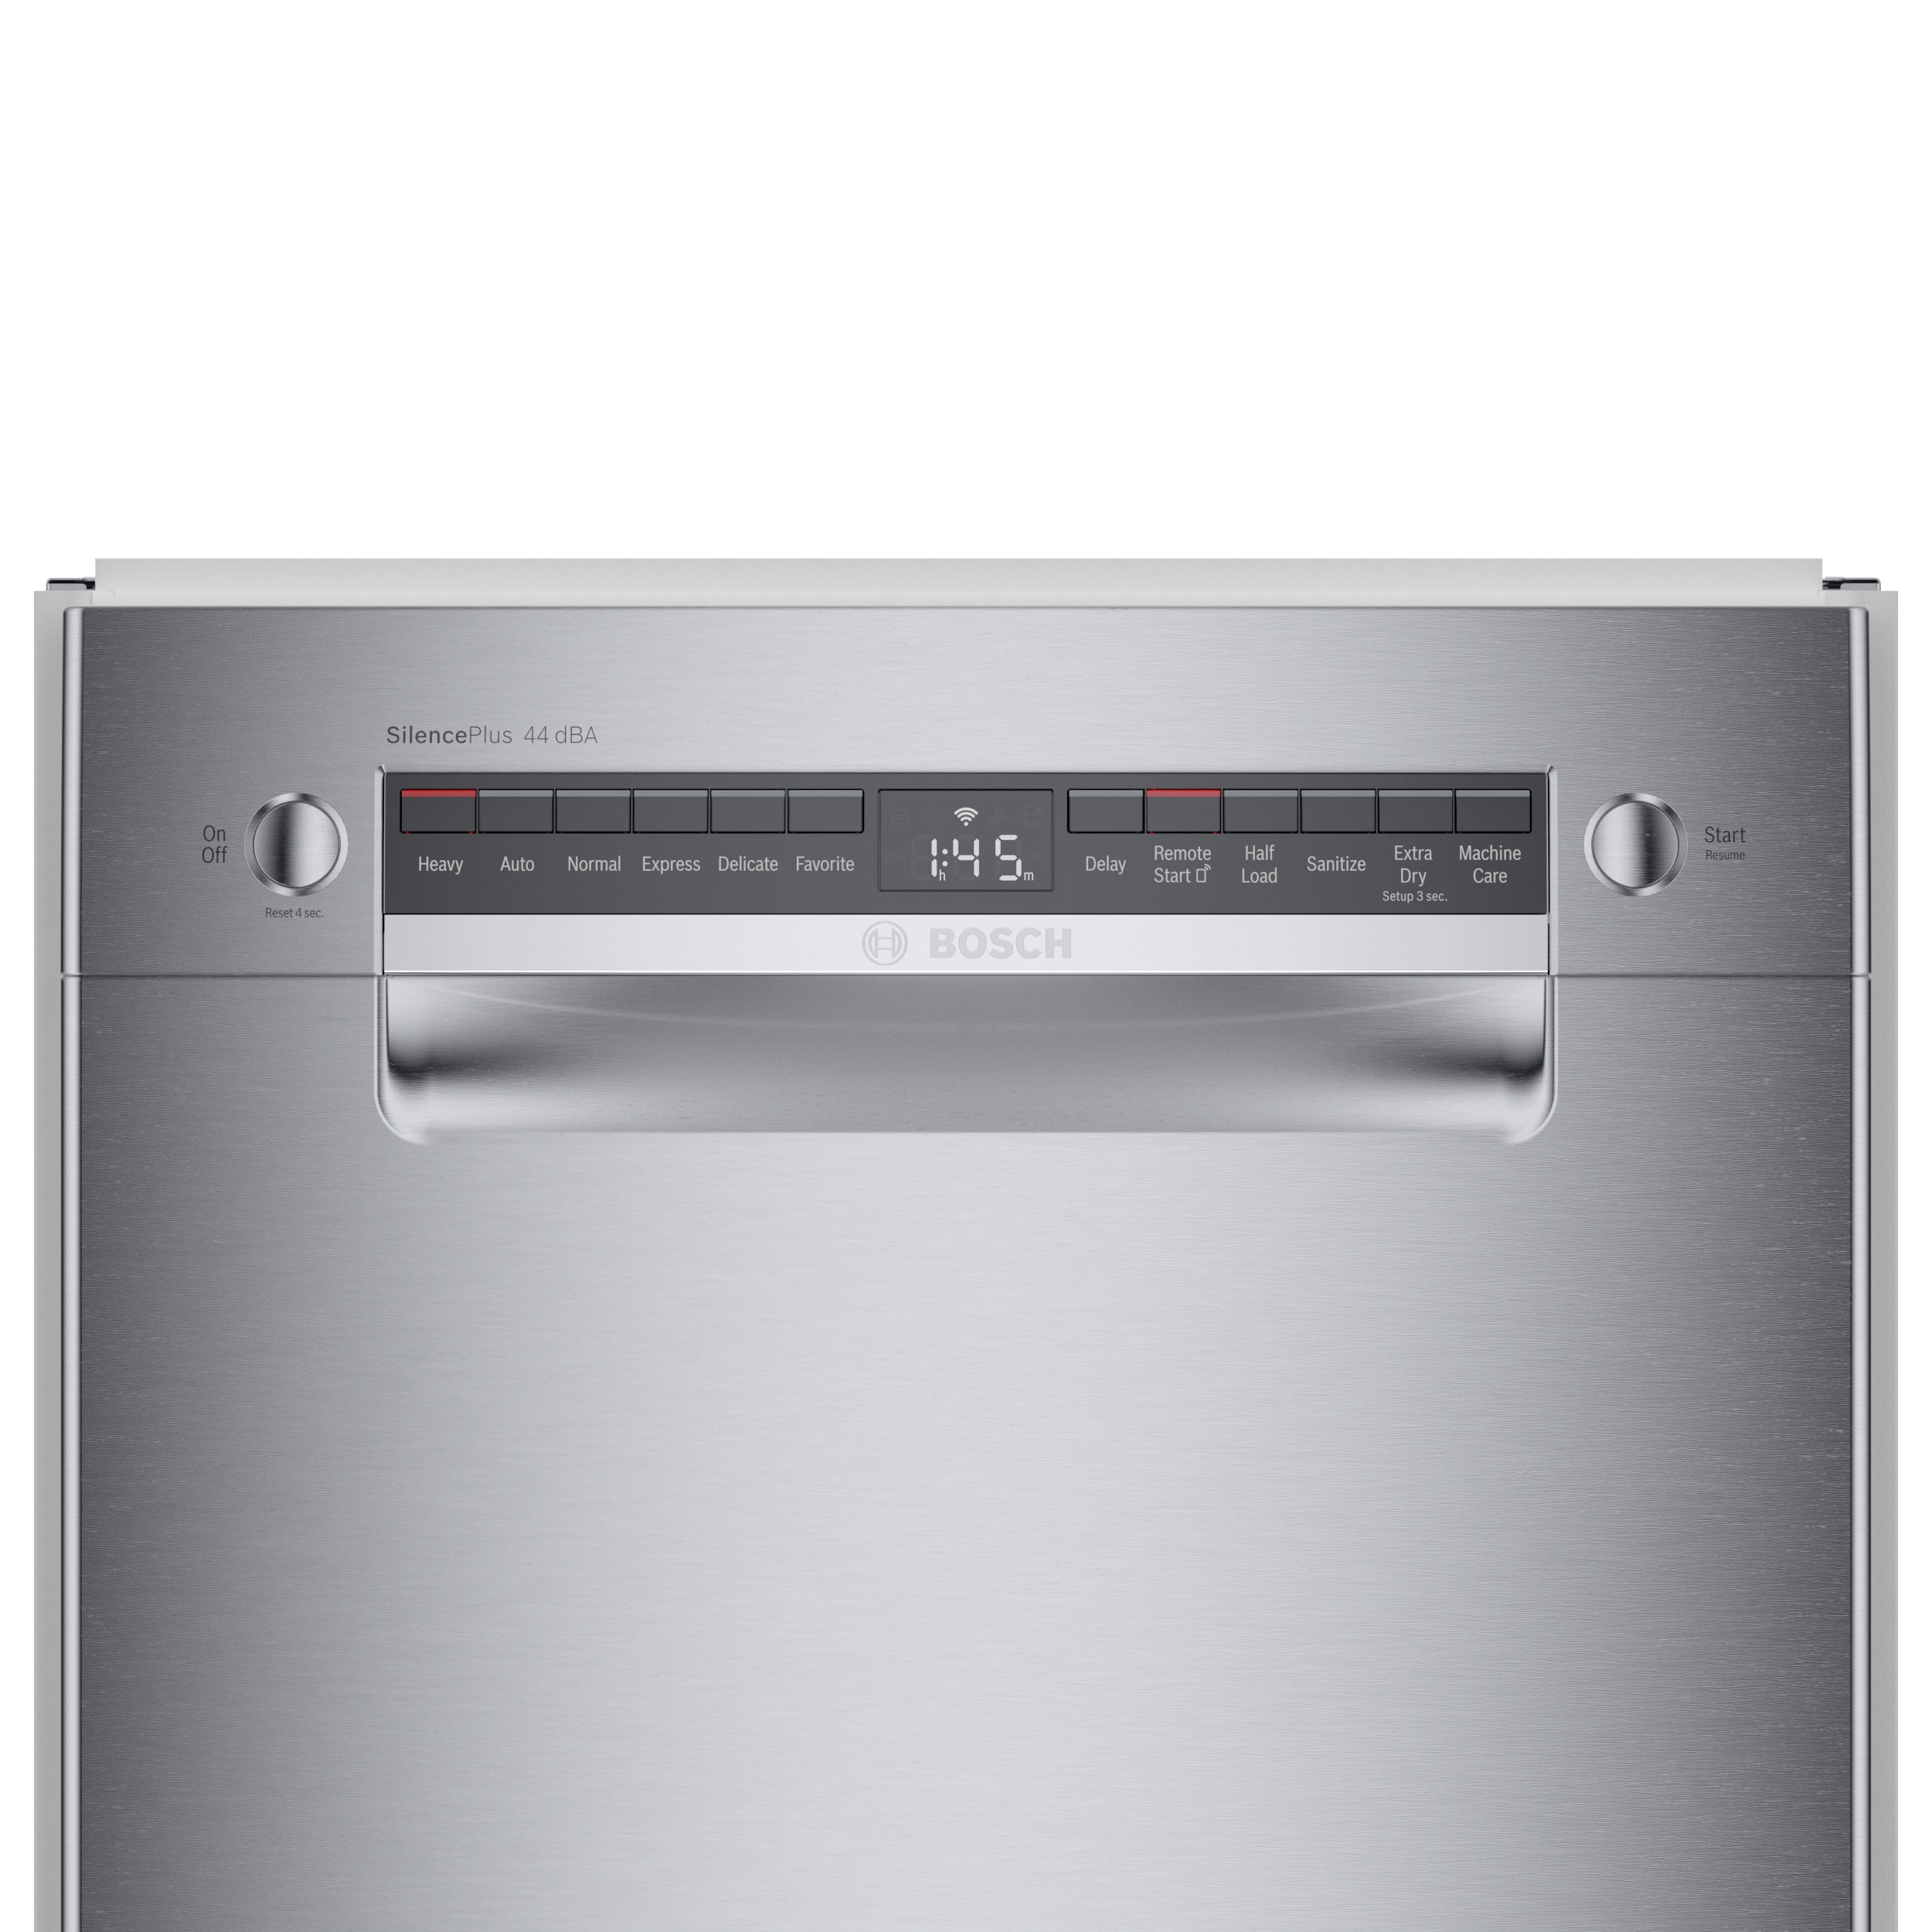 Bosch 800 Series Front Control 18-in Built-In Dishwasher (Stainless Steel) ENERGY STAR, 44-dBA in the Built-In Dishwashers department at